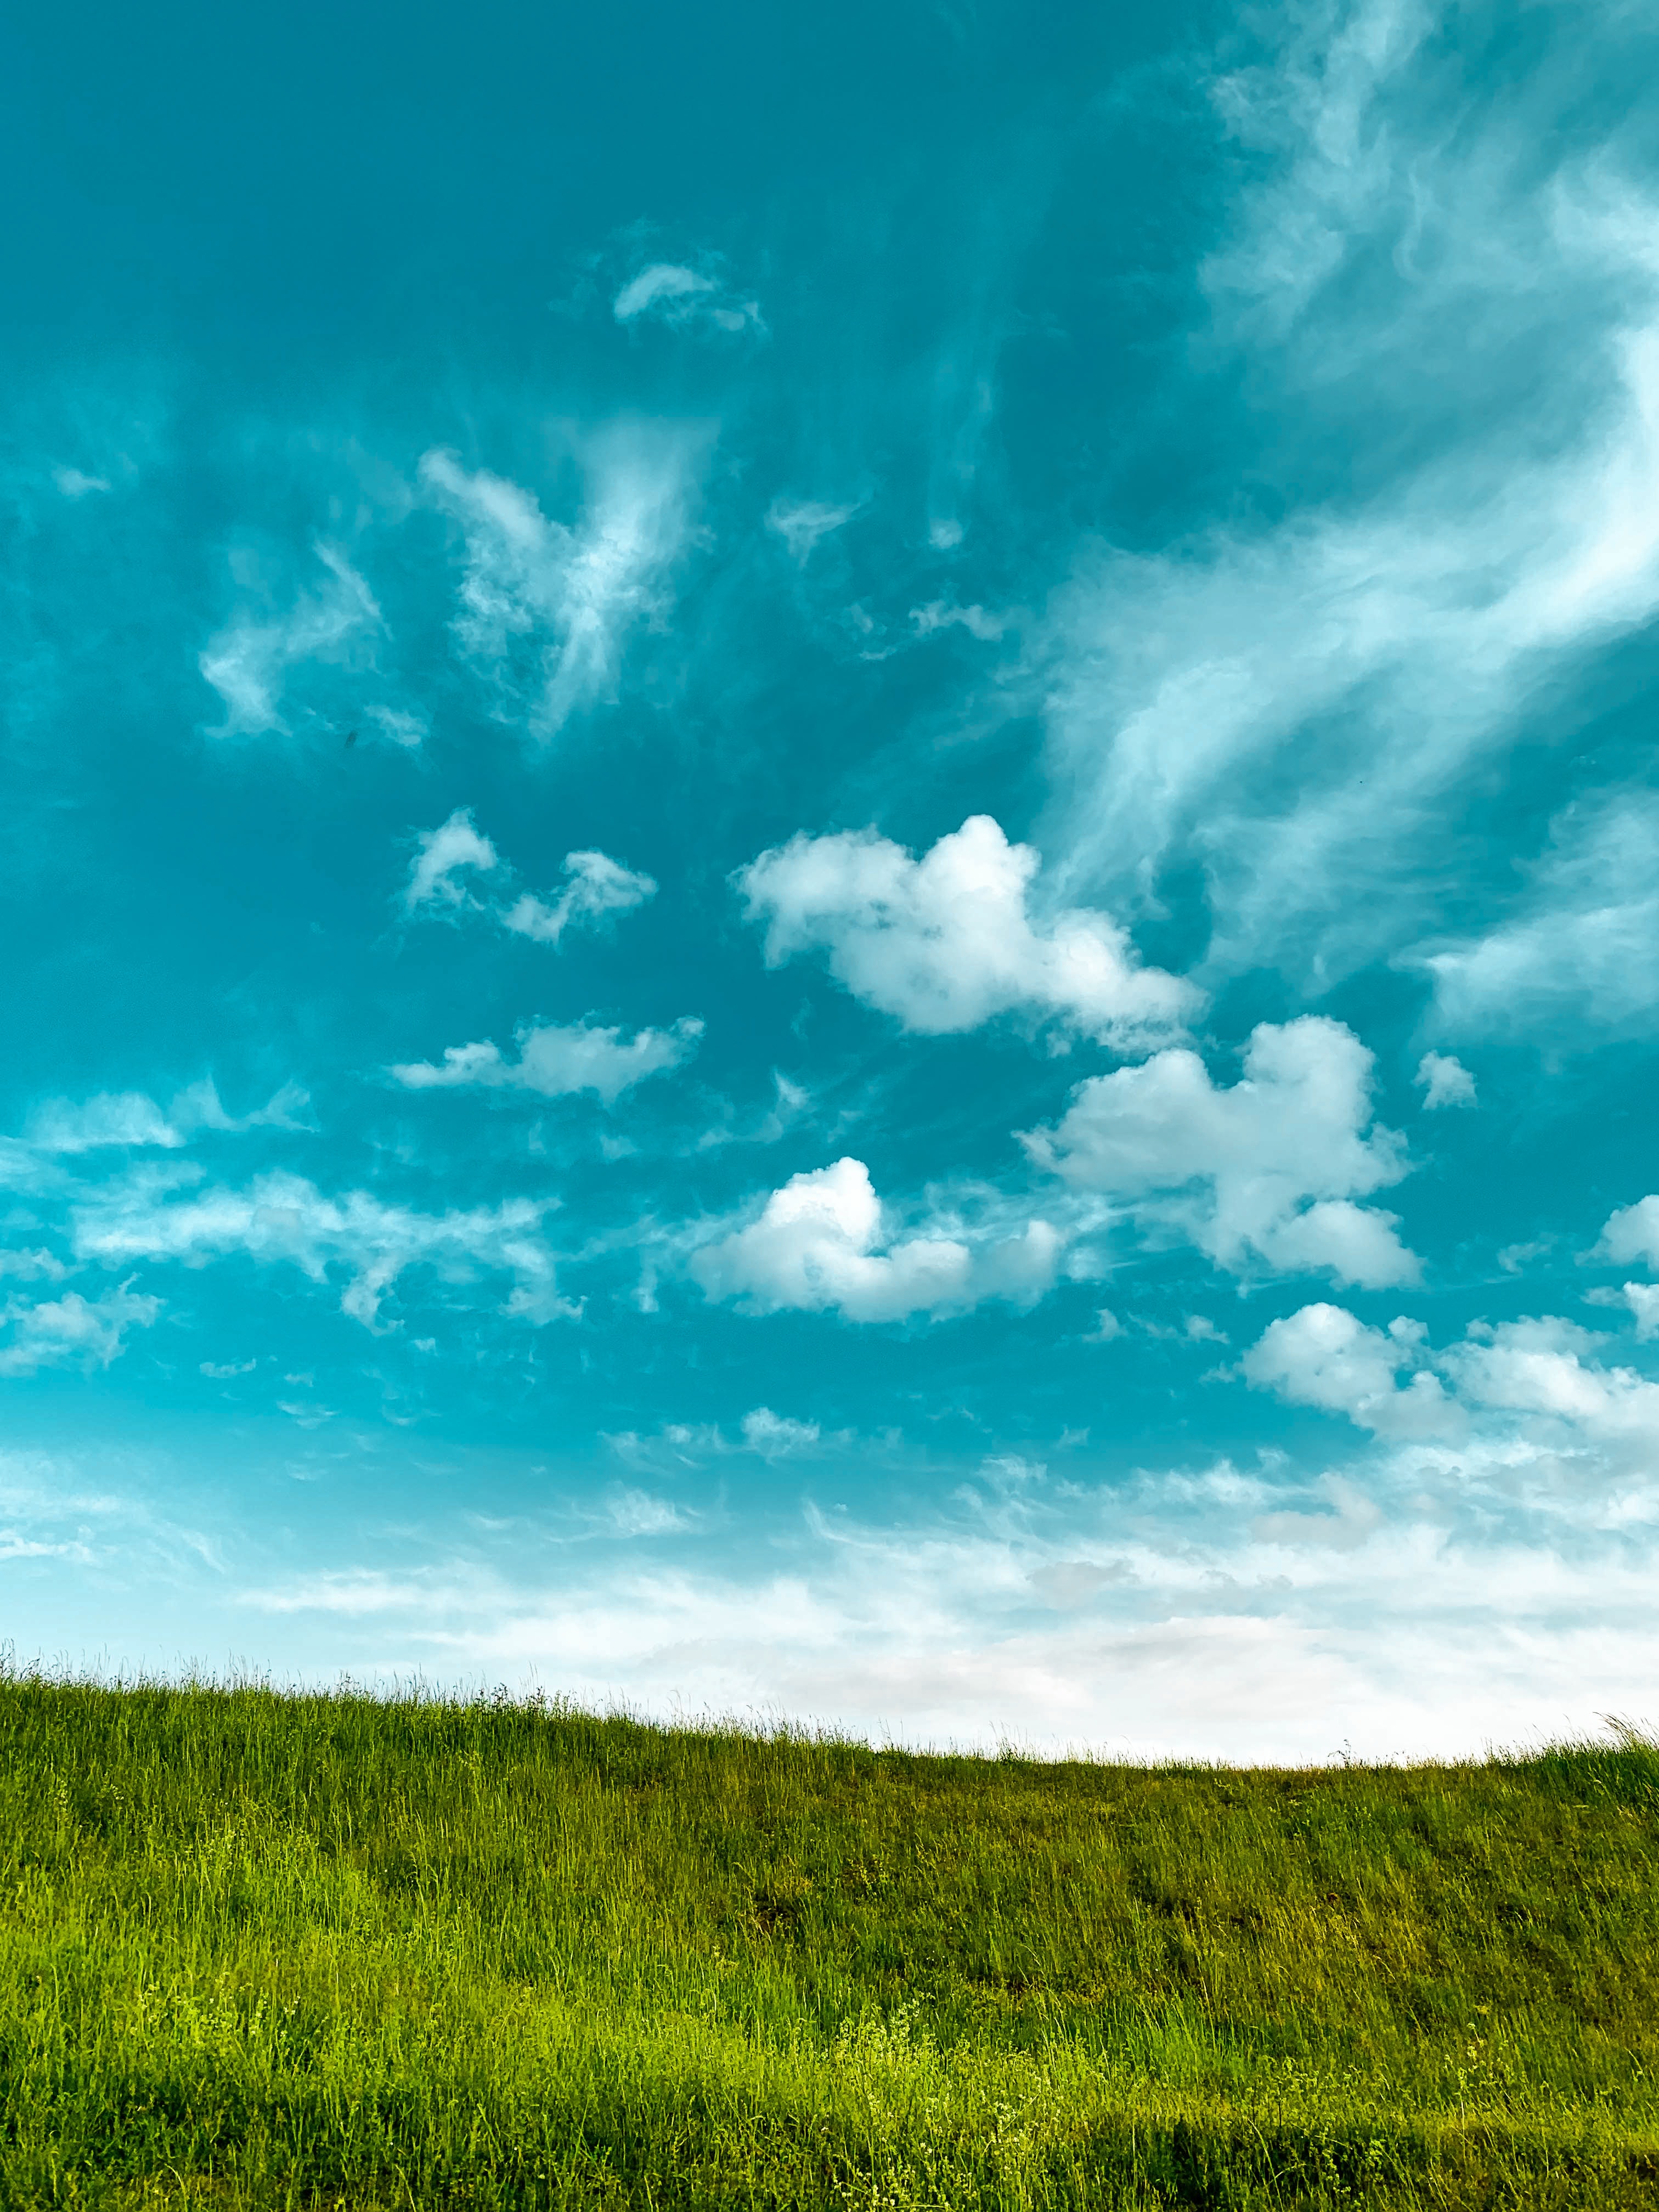 android clouds, minimalism, nature, grass, sky